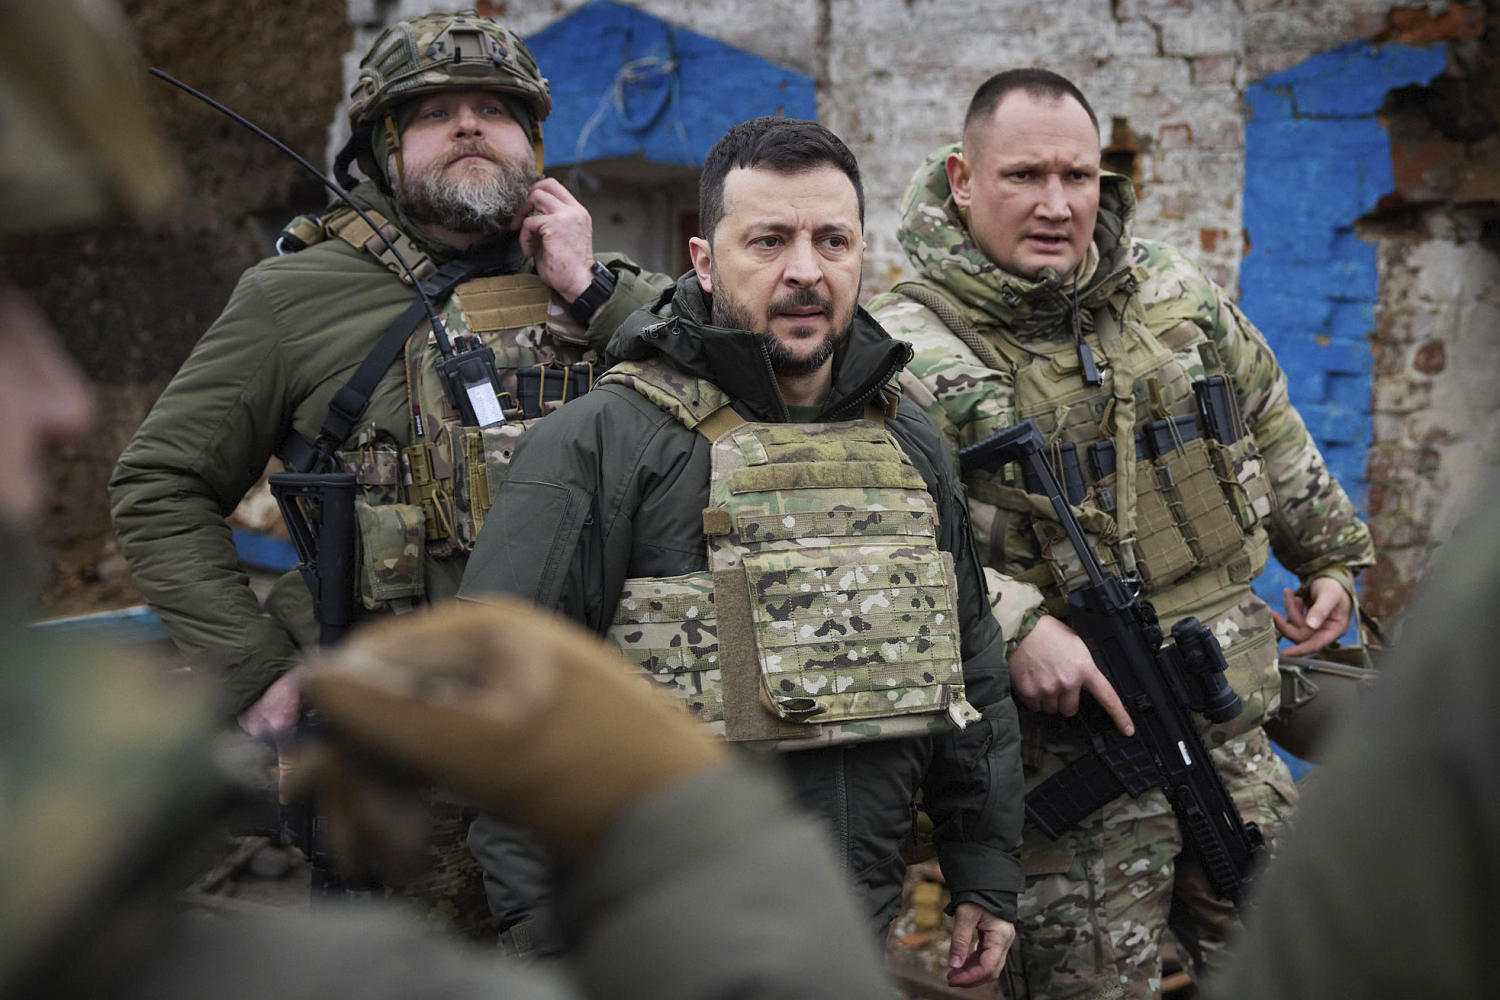 Ukrainian president confirms he’s thinking about dismissing the country’s military chief